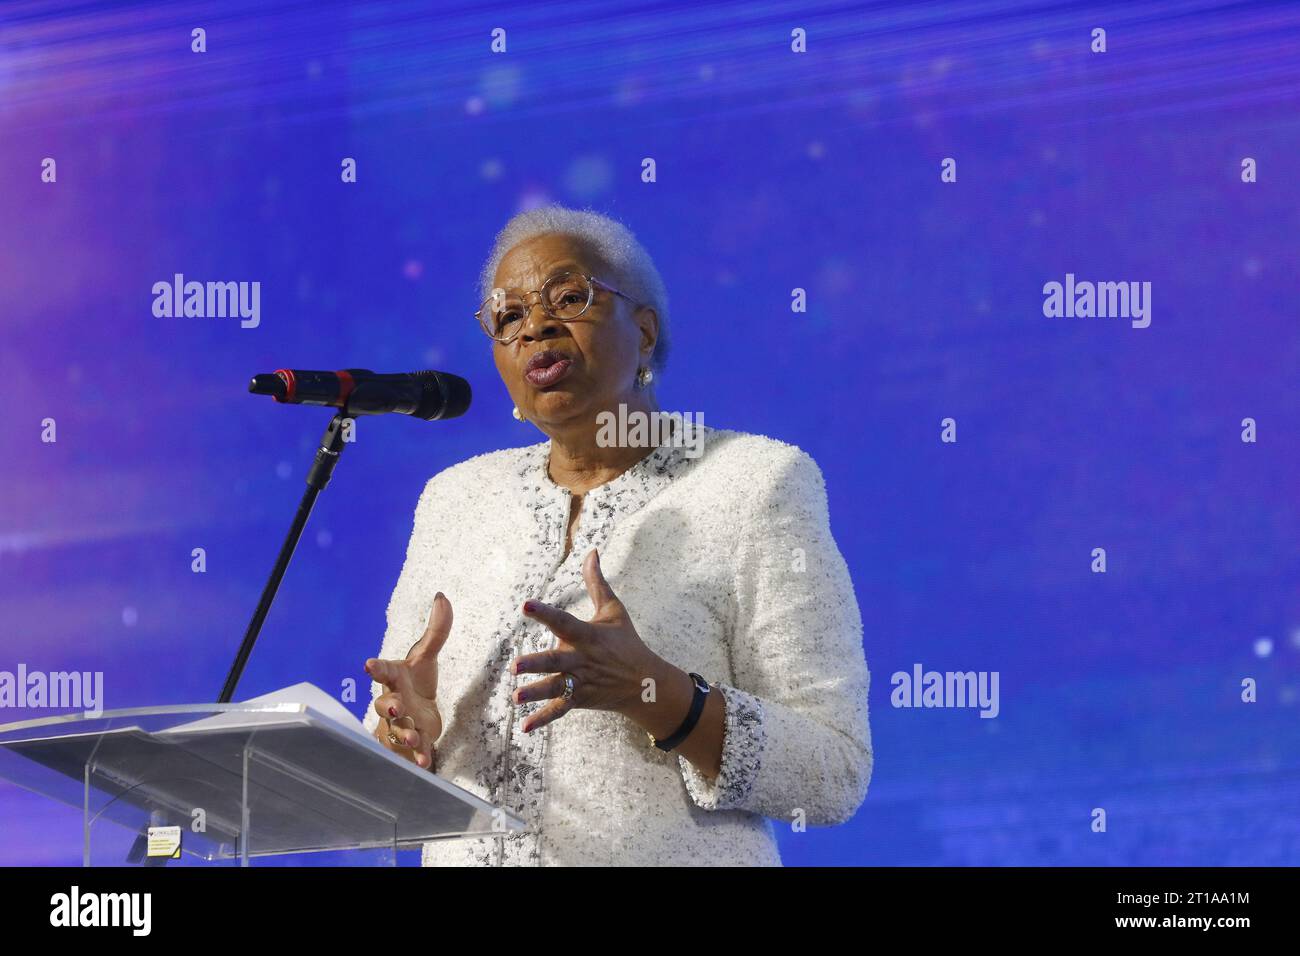 Mozambican activist Graça Machel, former first lady of South Africa and widow of Nelson Mandela, speaks at Rio Innovation Week Stock Photo